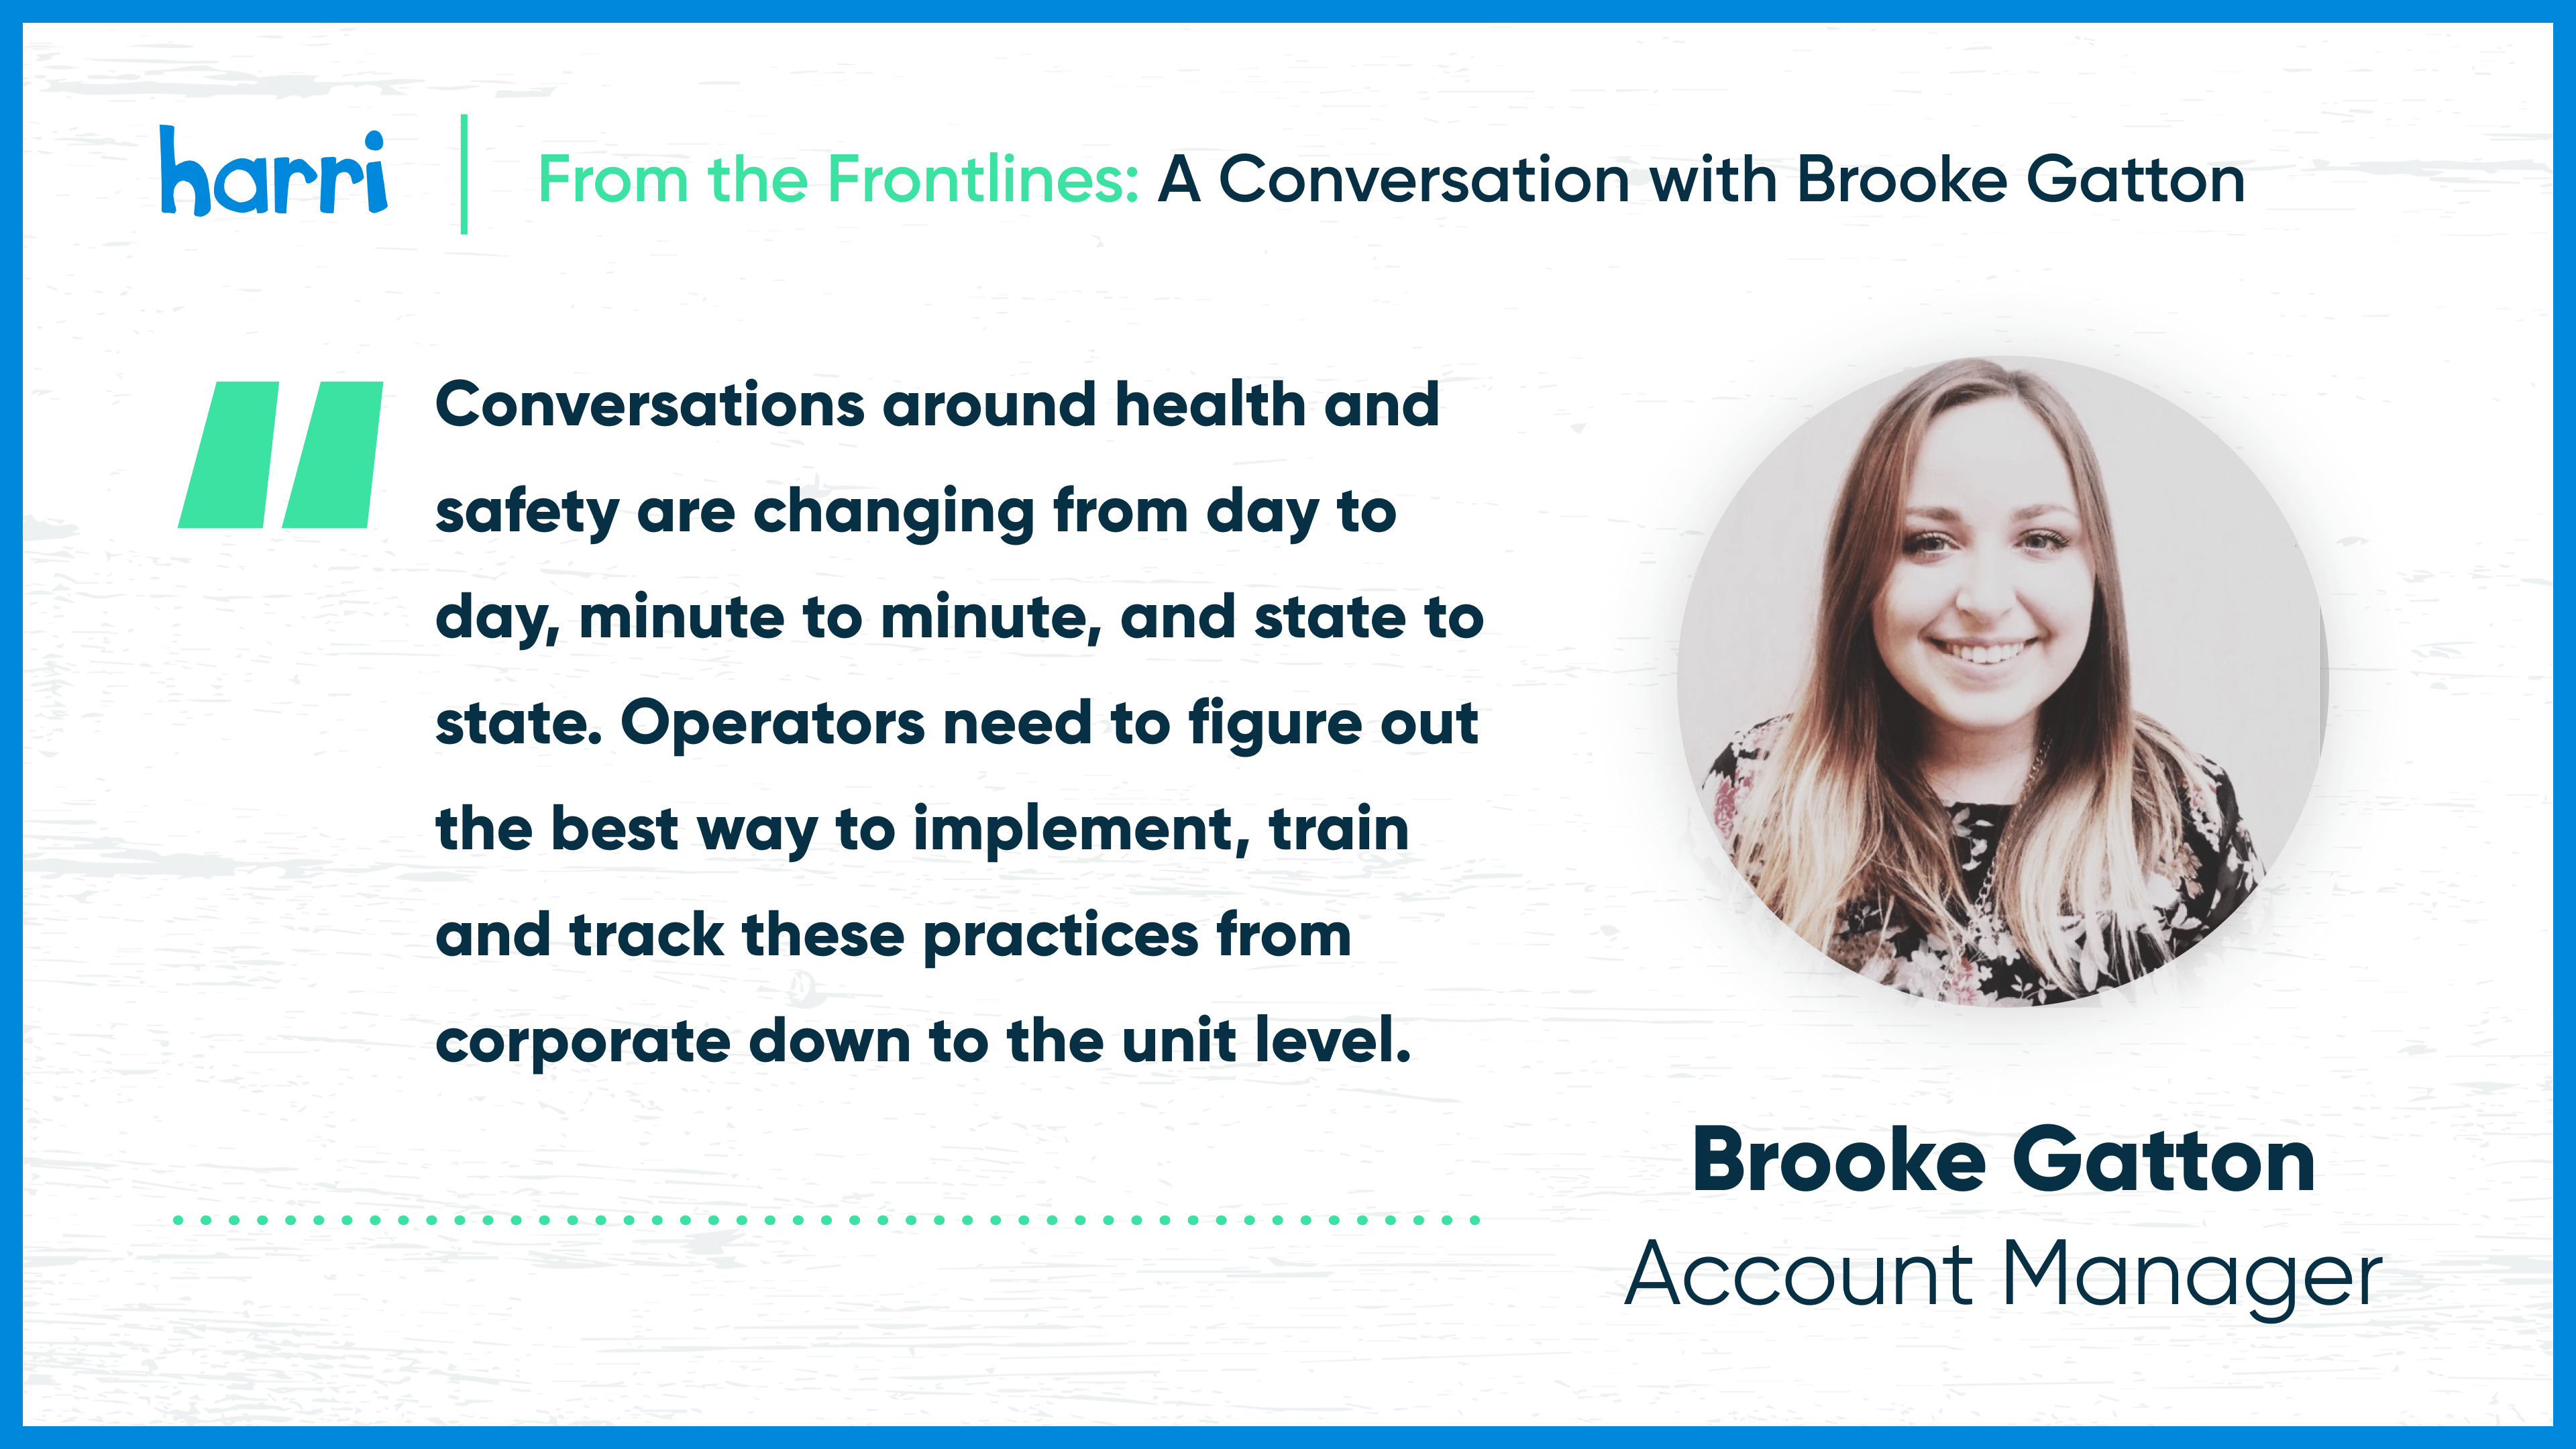 From the Frontliens Brooke discusses employee health and safety